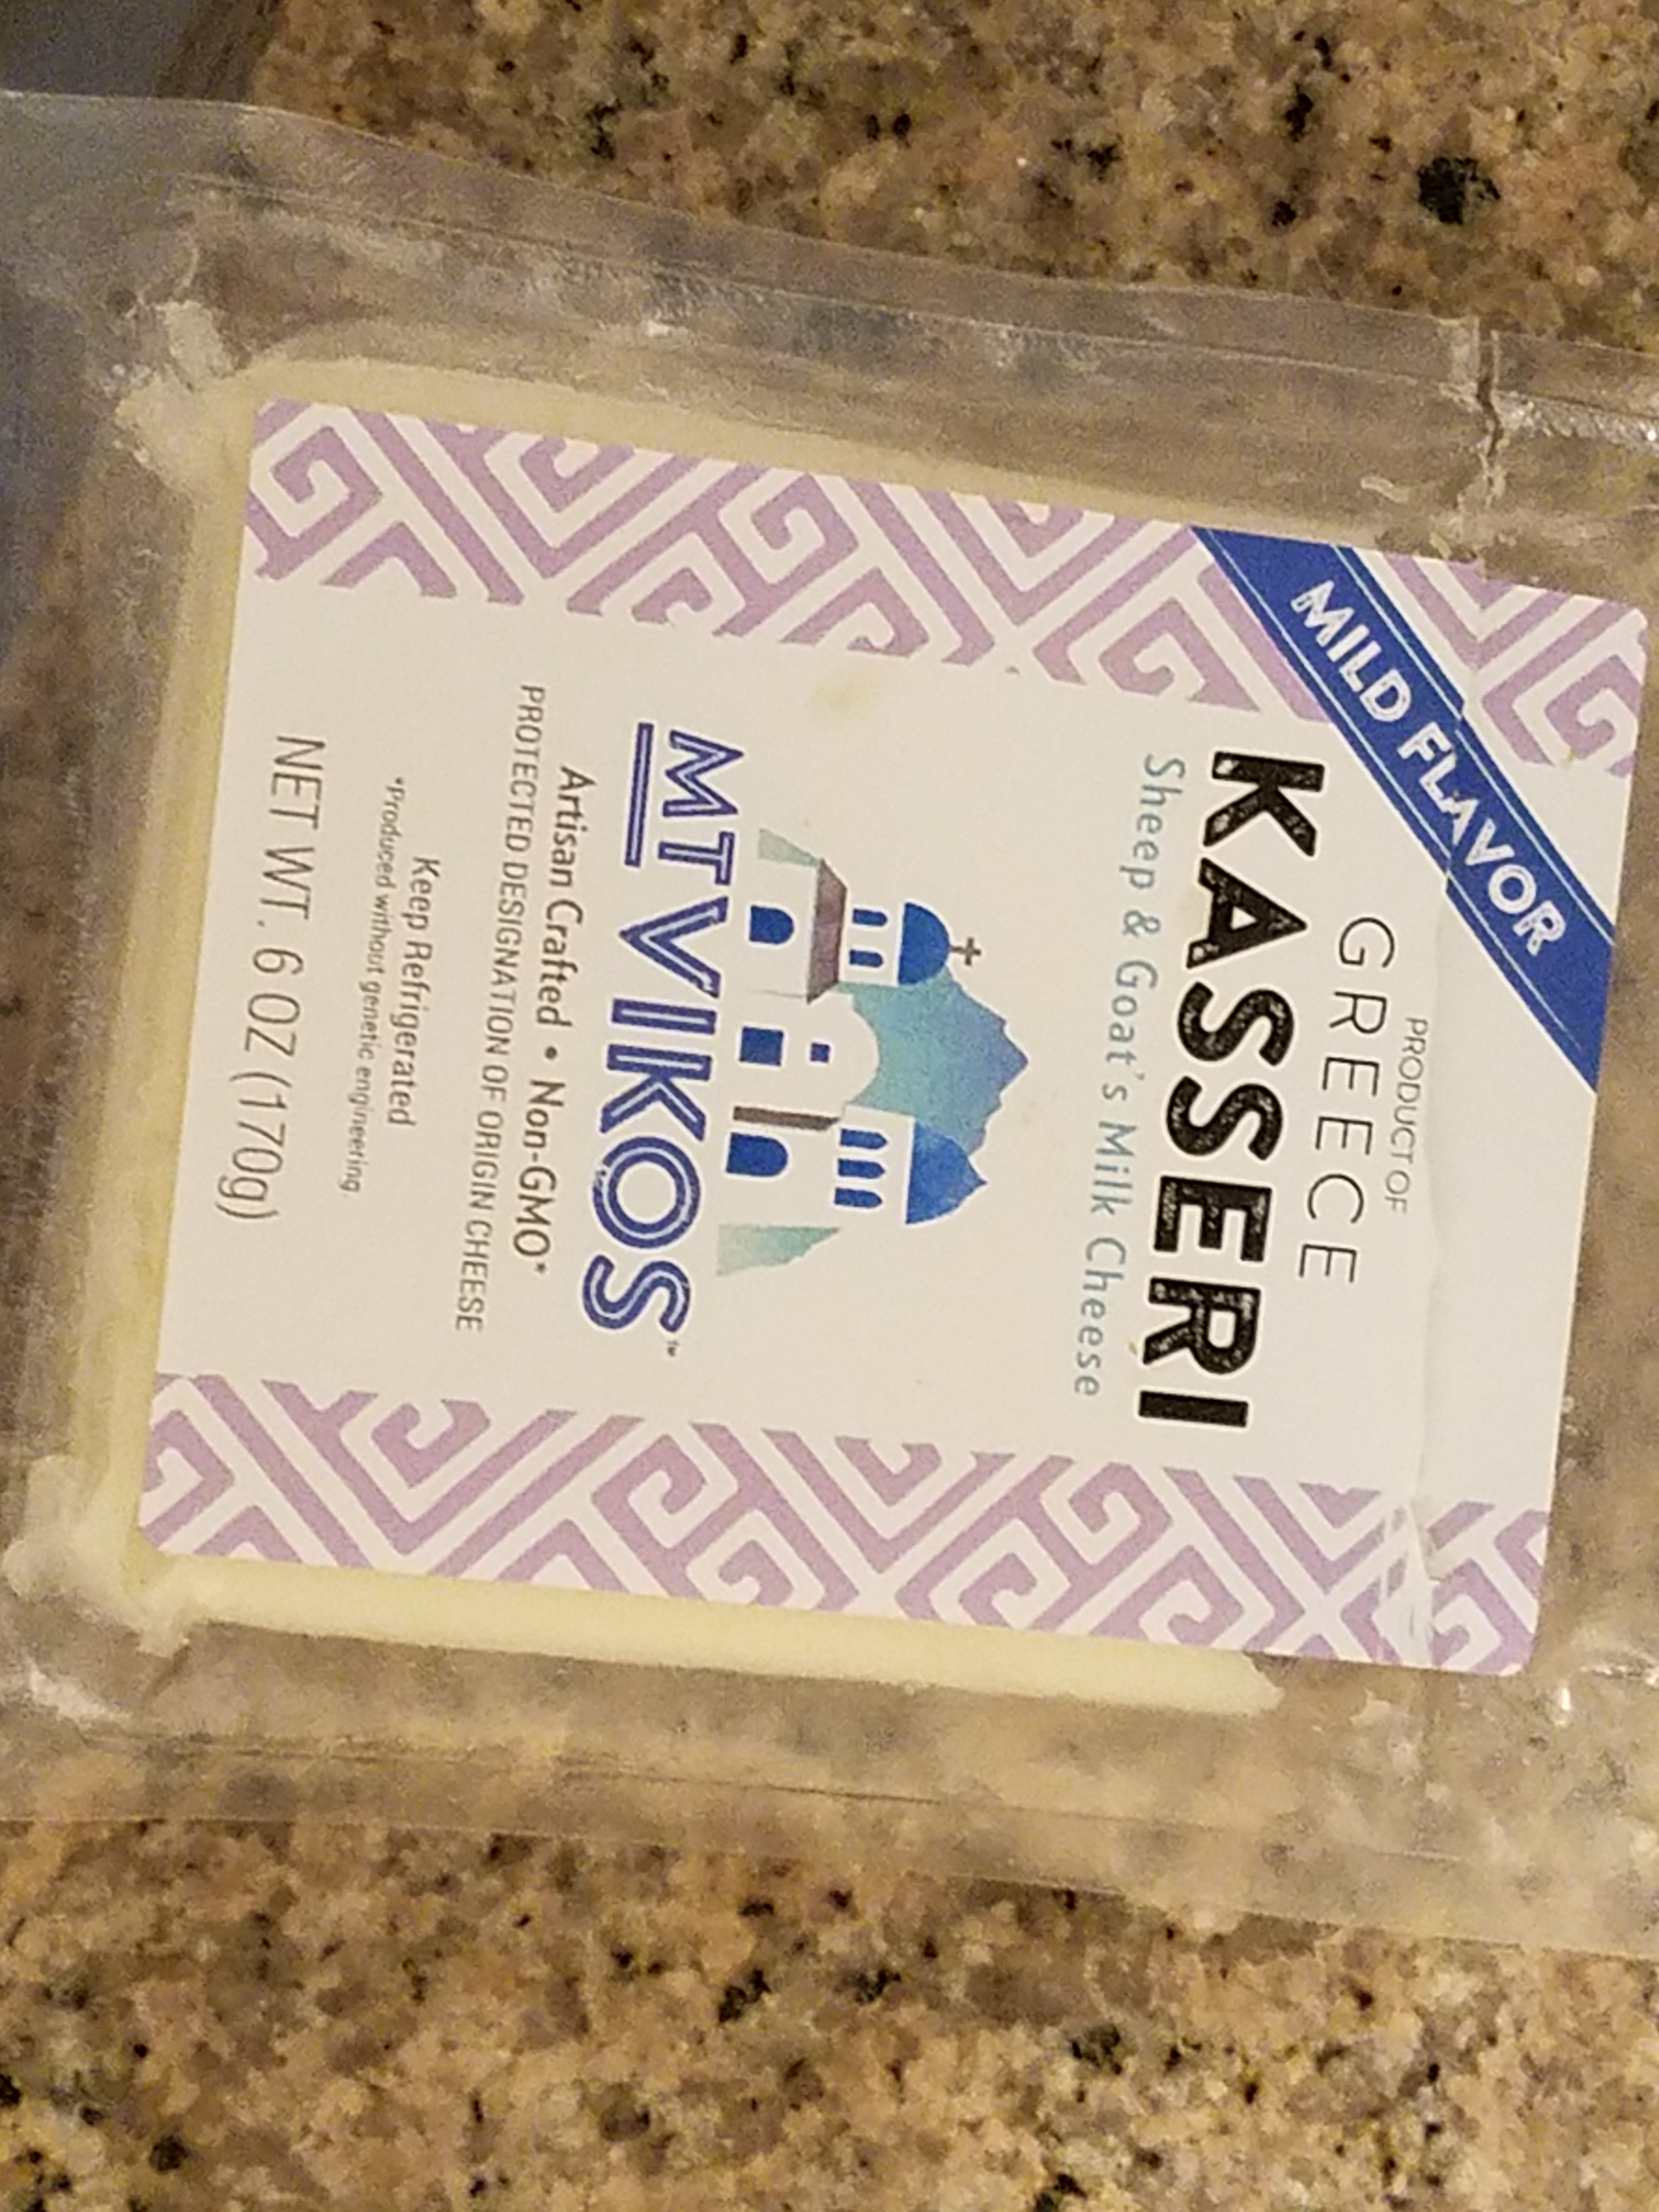 Living well in the 21st century. Limassol, Cyprus. A plastic container containing kasseri cheese. Product of Greece. Mt Vikos - artisan crafted, non-gmo, net wt. 6 oz (170g). 